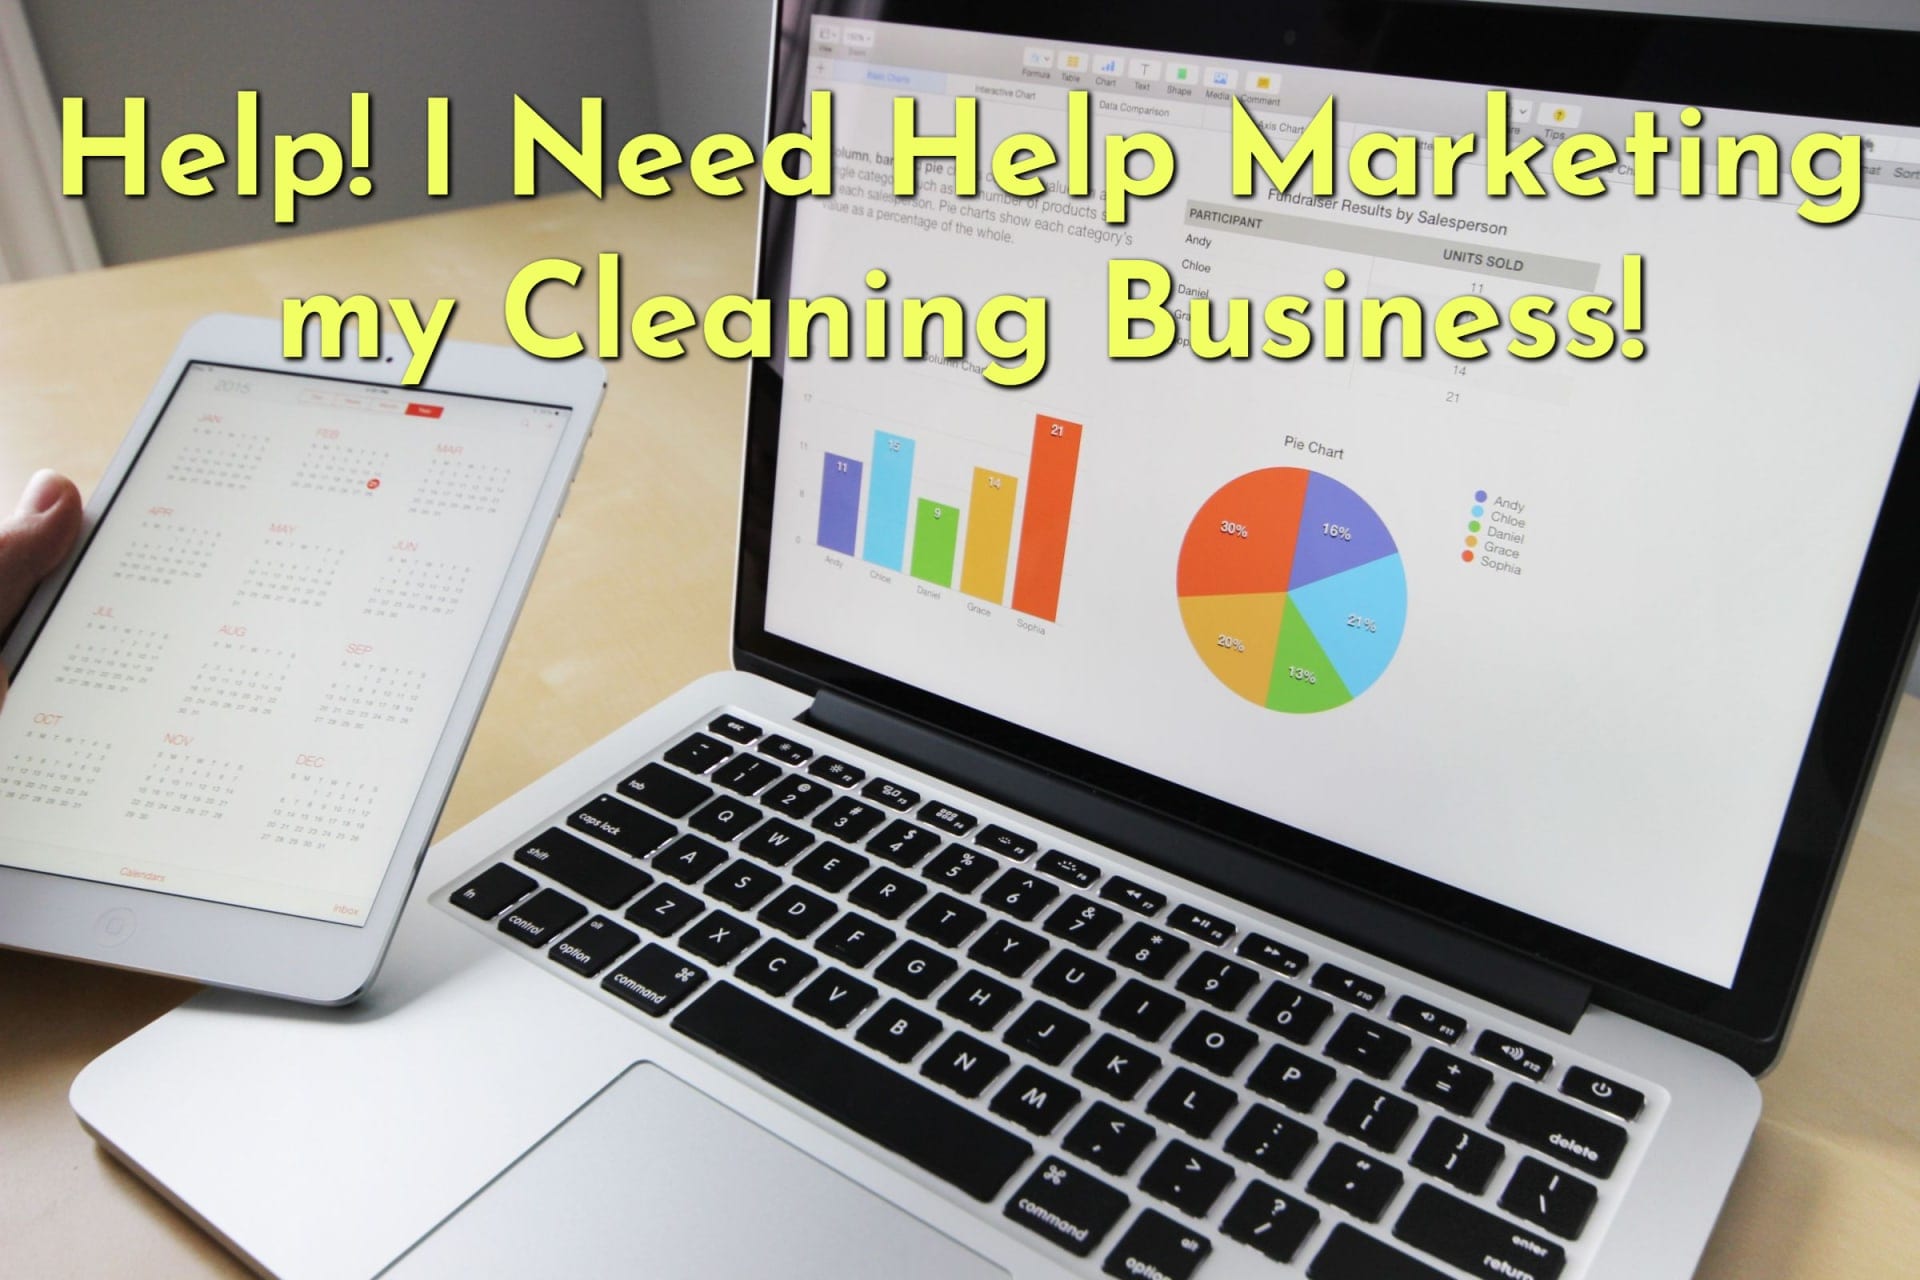 A business owner at their computer who needs help marketing my cleaning business